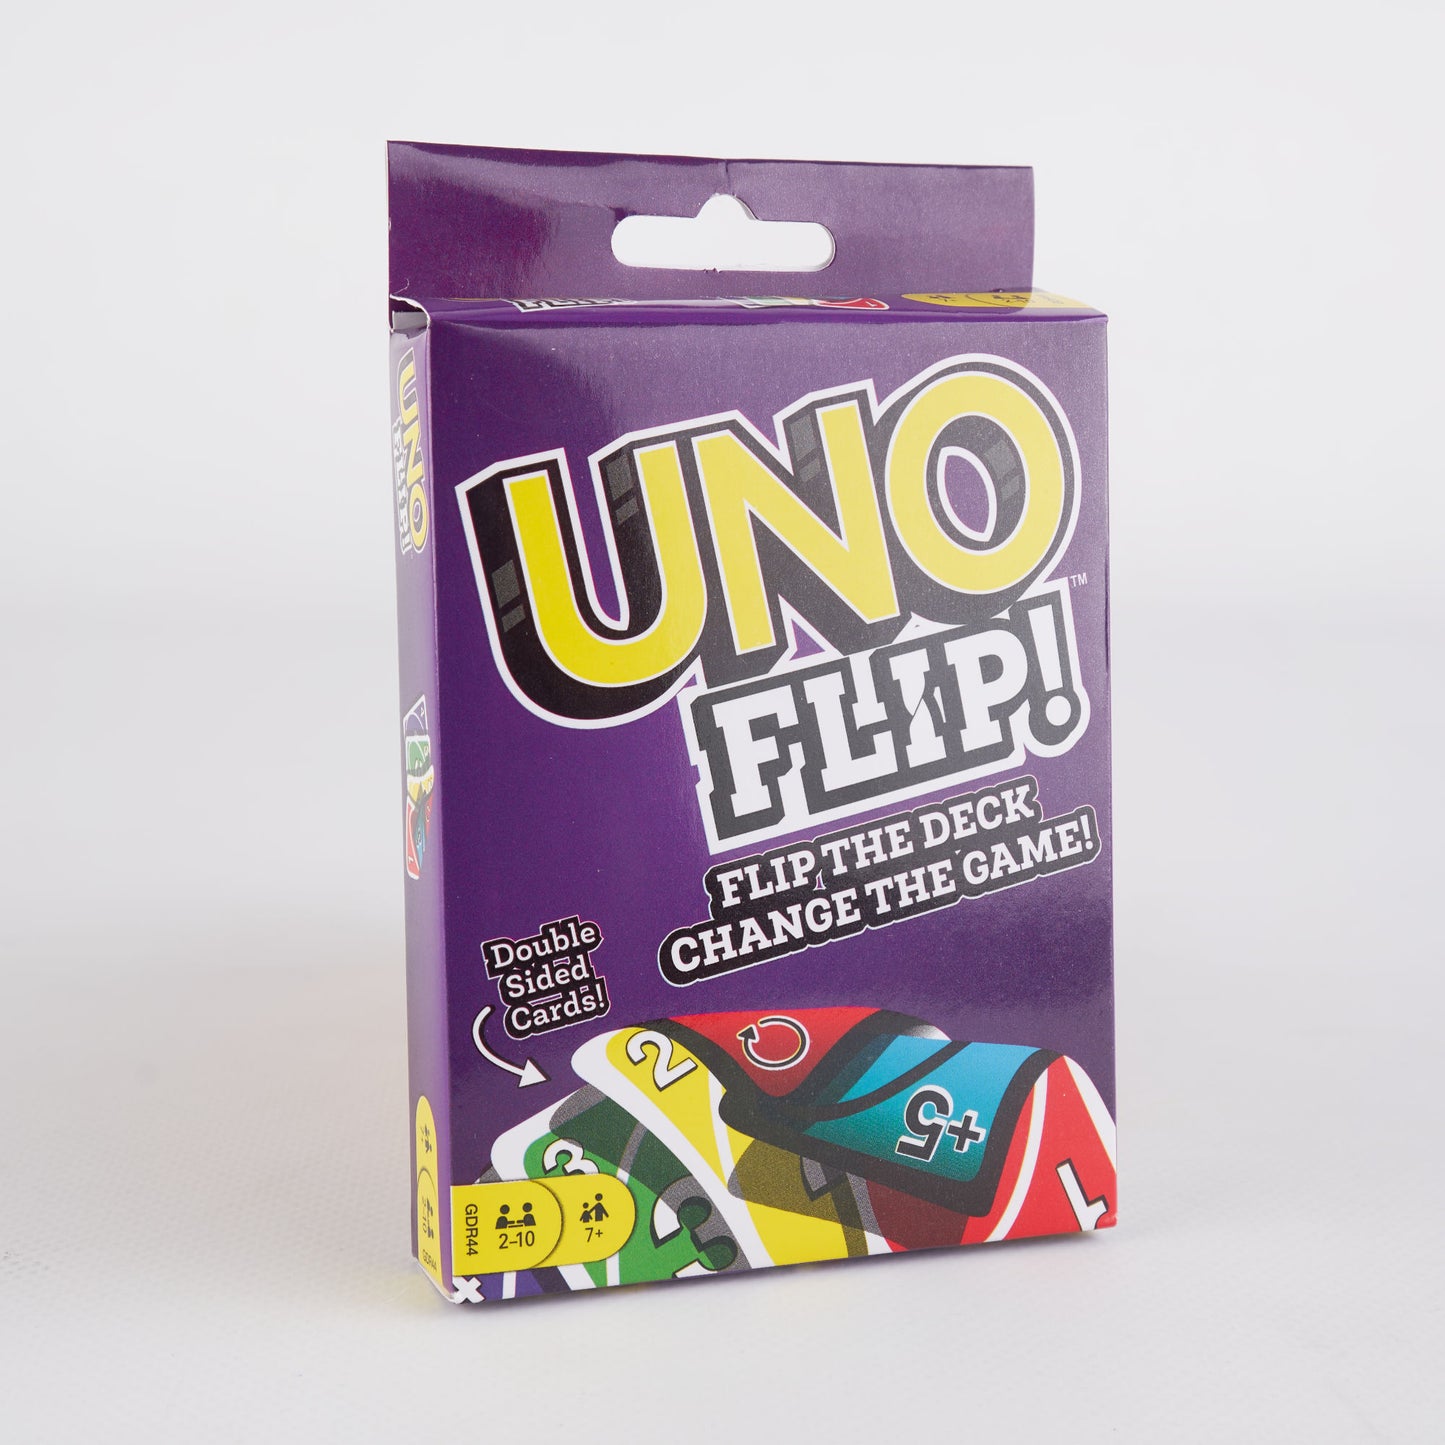 Uno Playing Card Deck